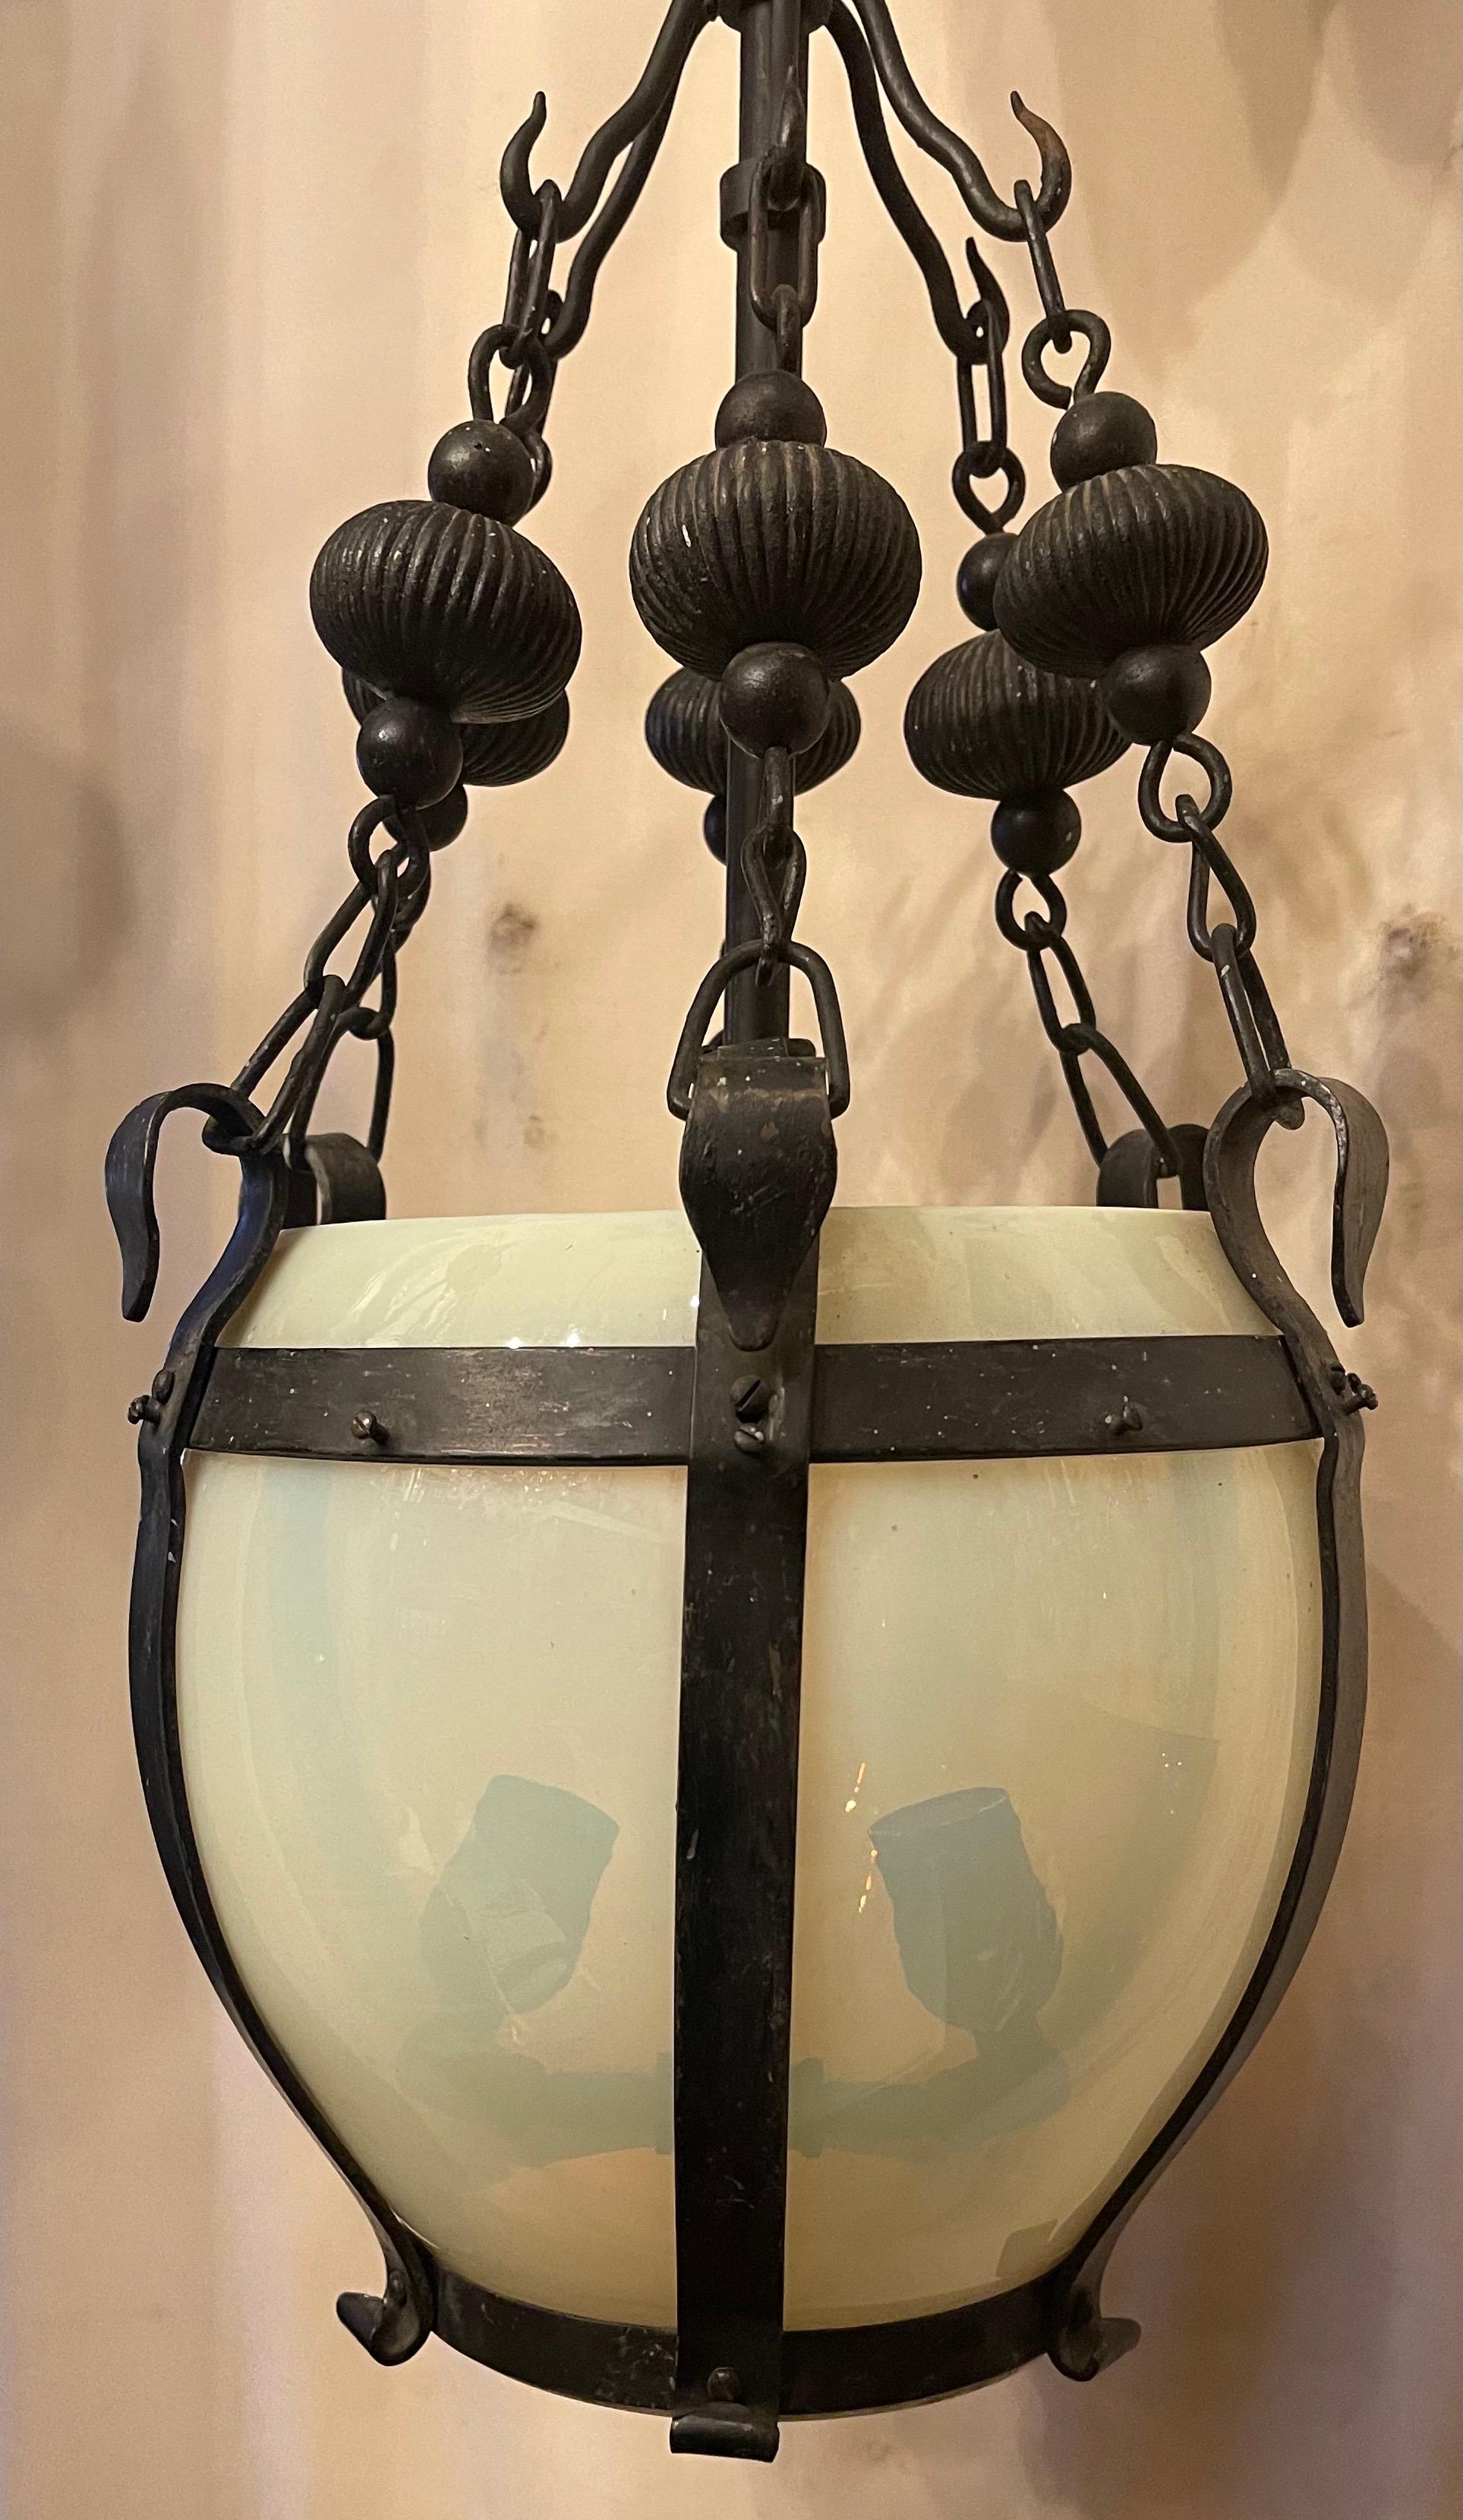 Wonderful French Art Deco Opaline Glass and Wrought Iron Lantern Pendent Fixture 1